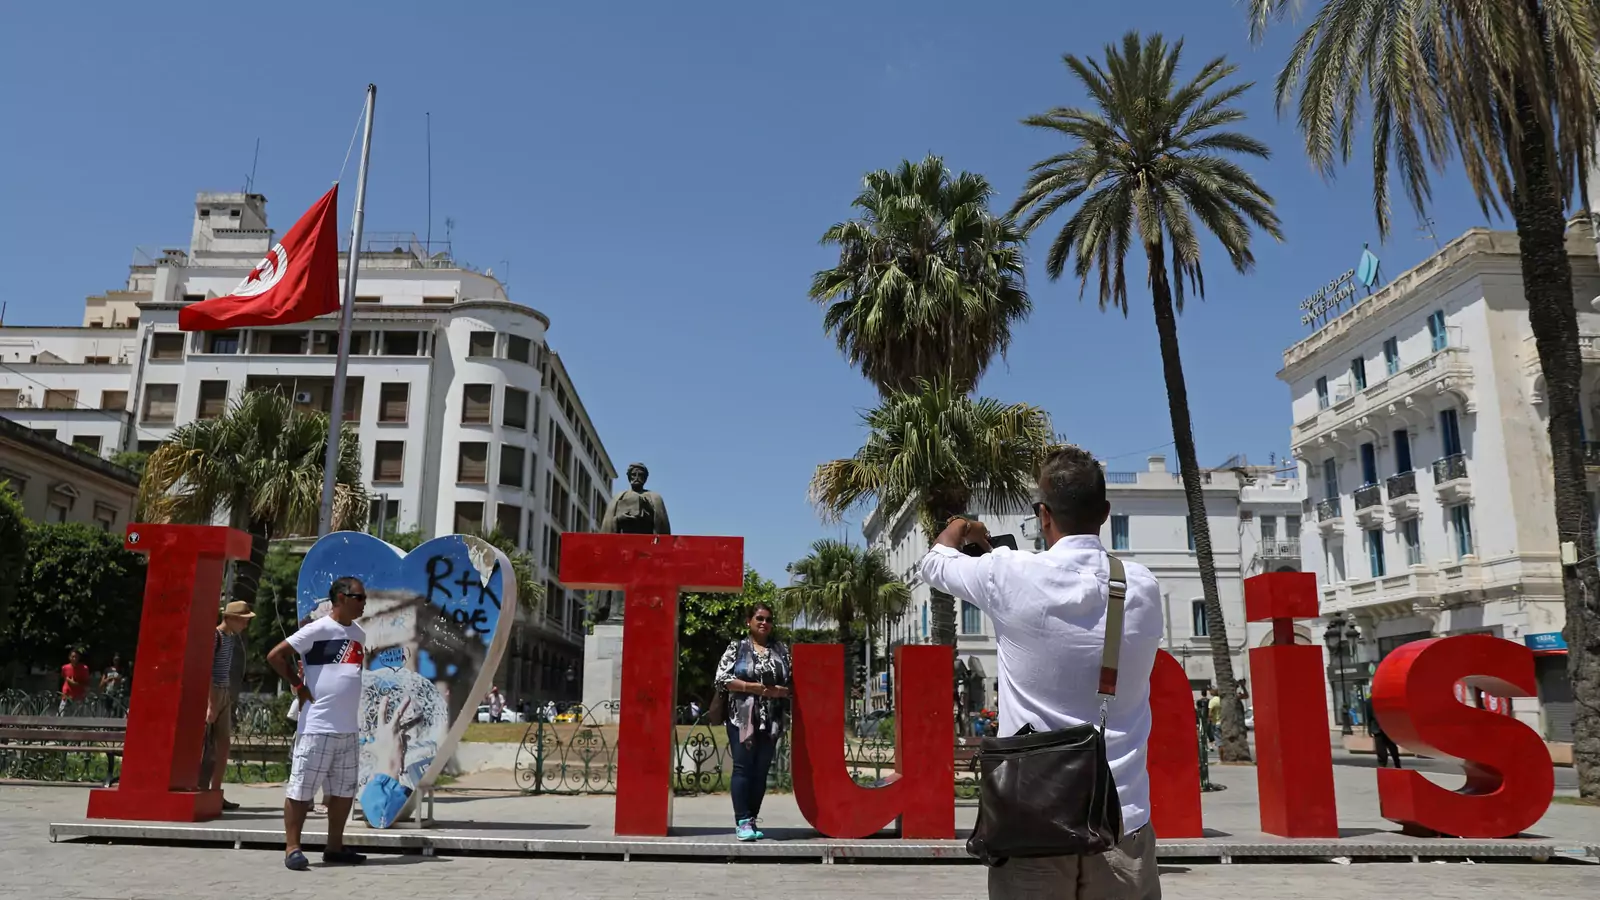 People pose for a photo with "I love Tunis" sign as a Tunisian flag flies at half-mast in honor of late Tunisian President Beji Caid Essebsi, in Tunis, Tunisia July 28, 2019.